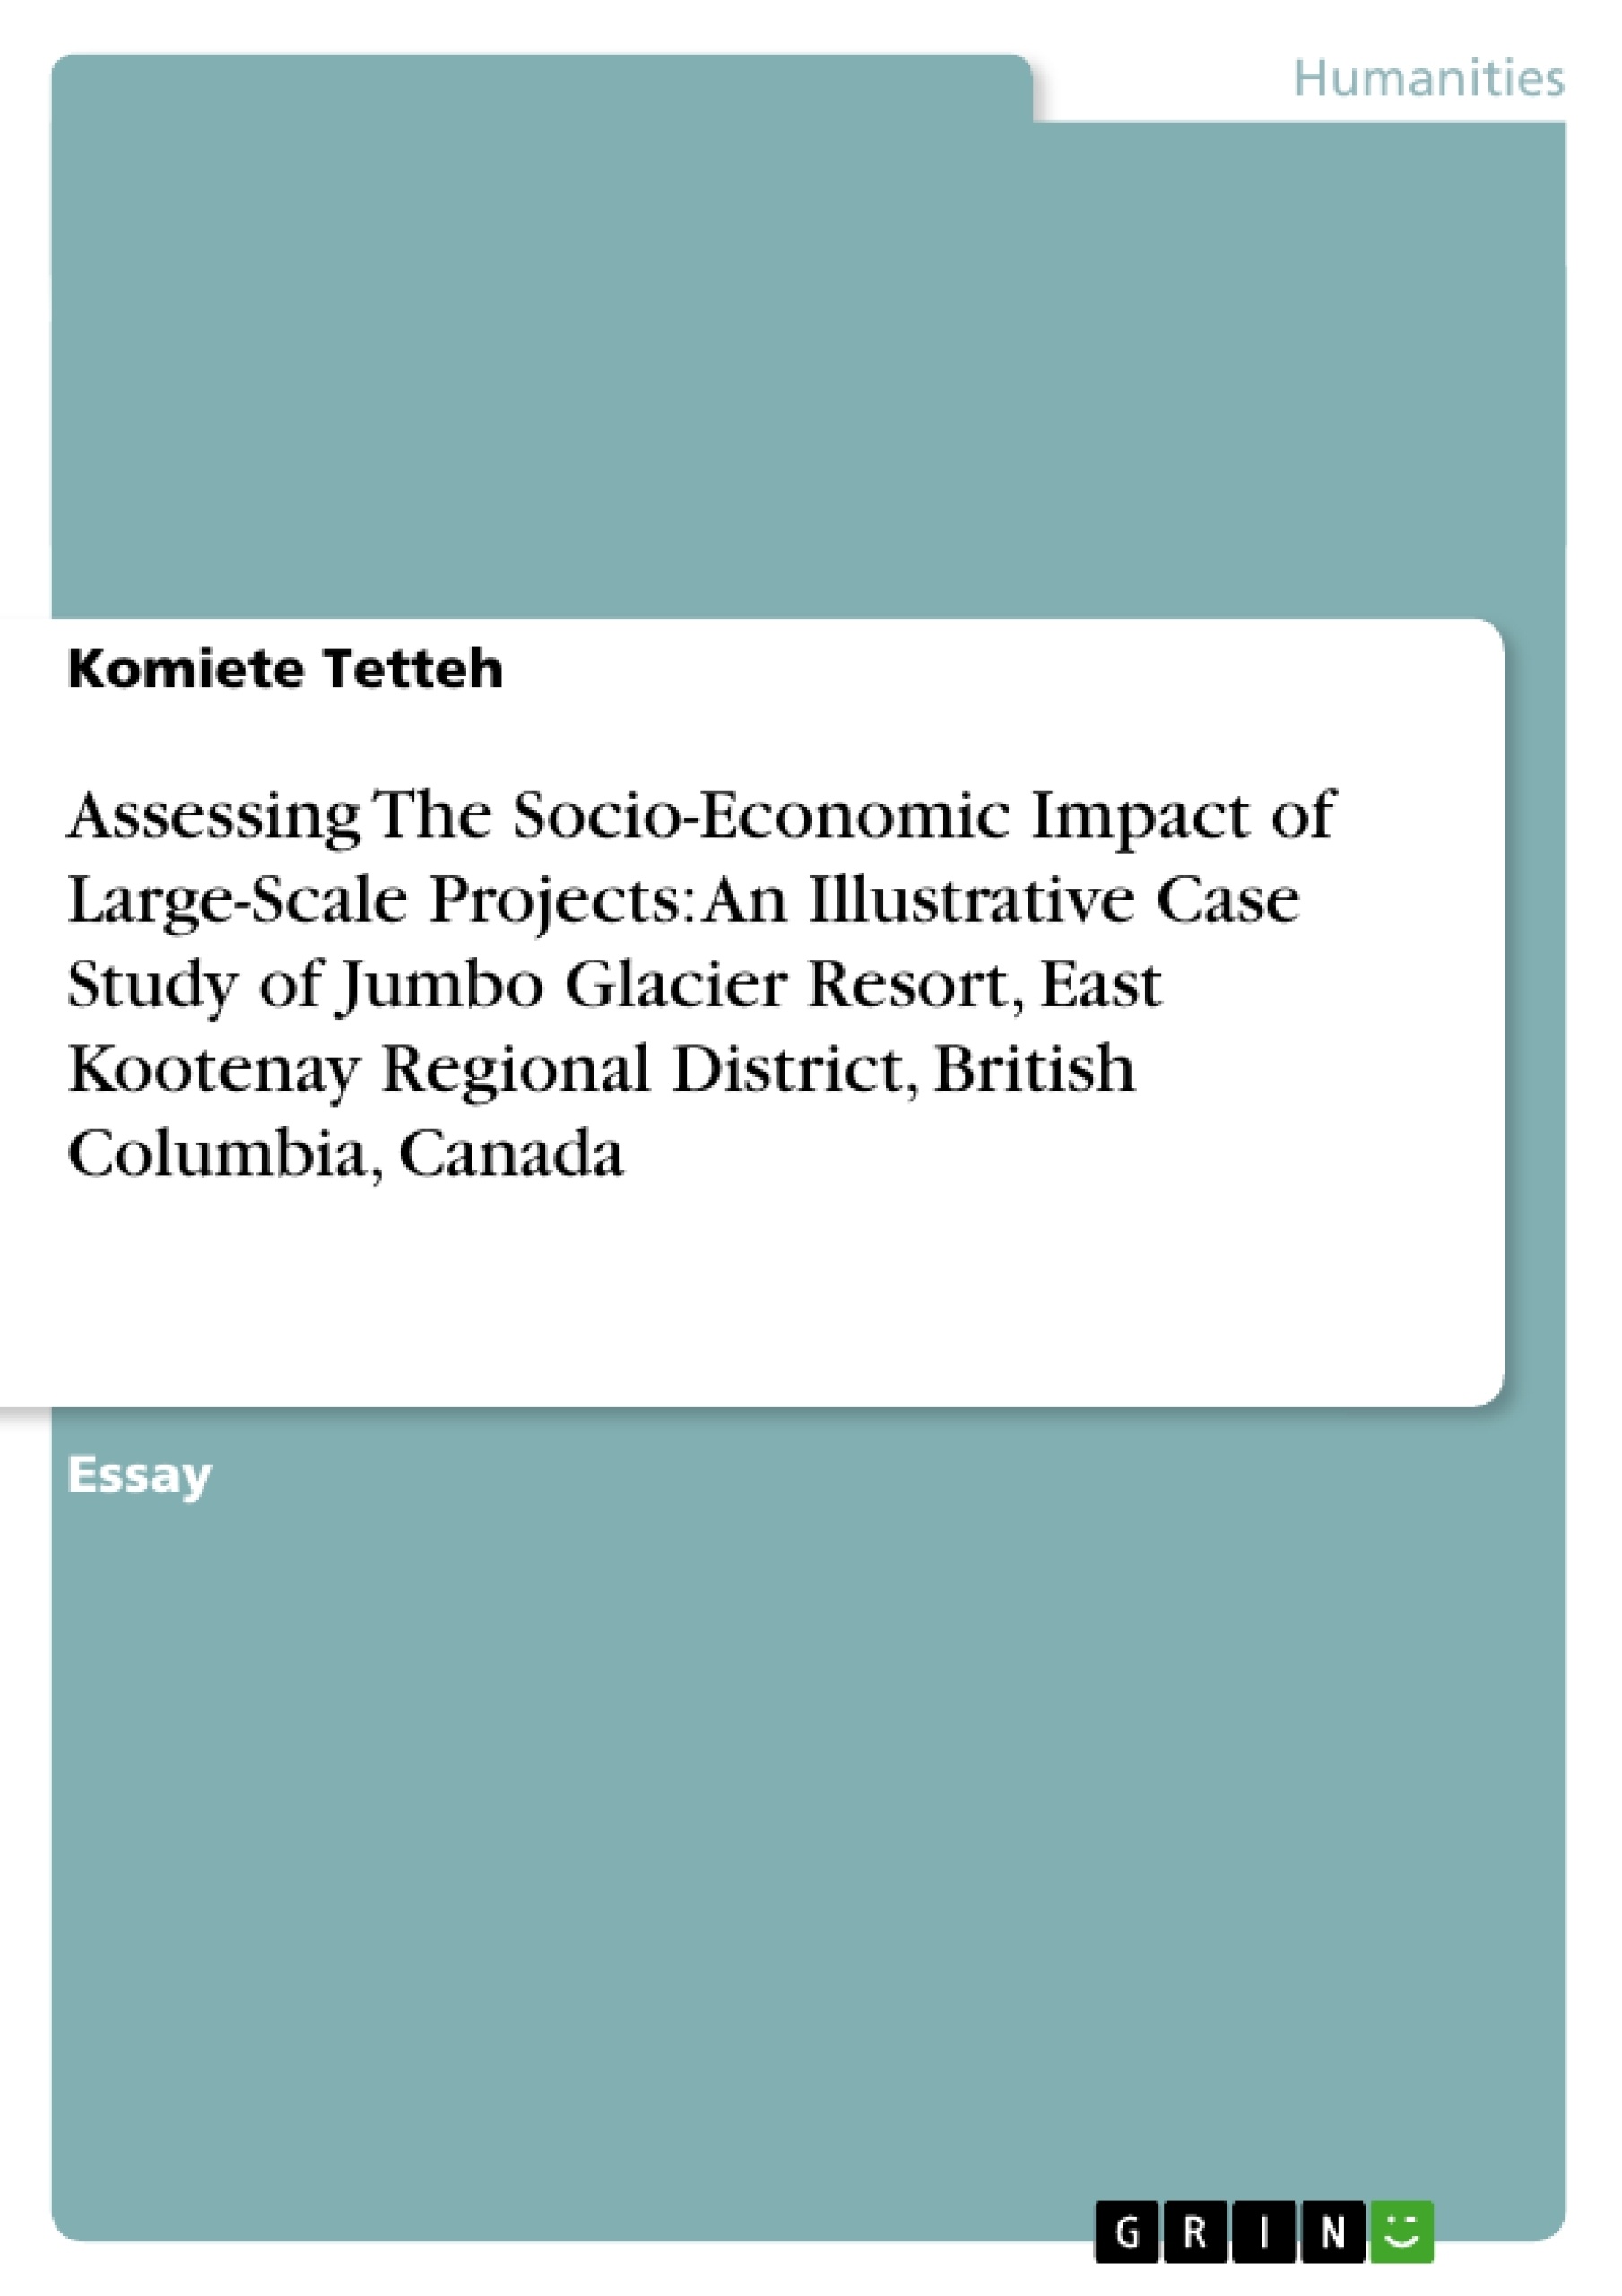 Título: Assessing The Socio-Economic Impact of Large-Scale Projects: An Illustrative Case Study of Jumbo Glacier Resort, East Kootenay Regional District, British Columbia, Canada